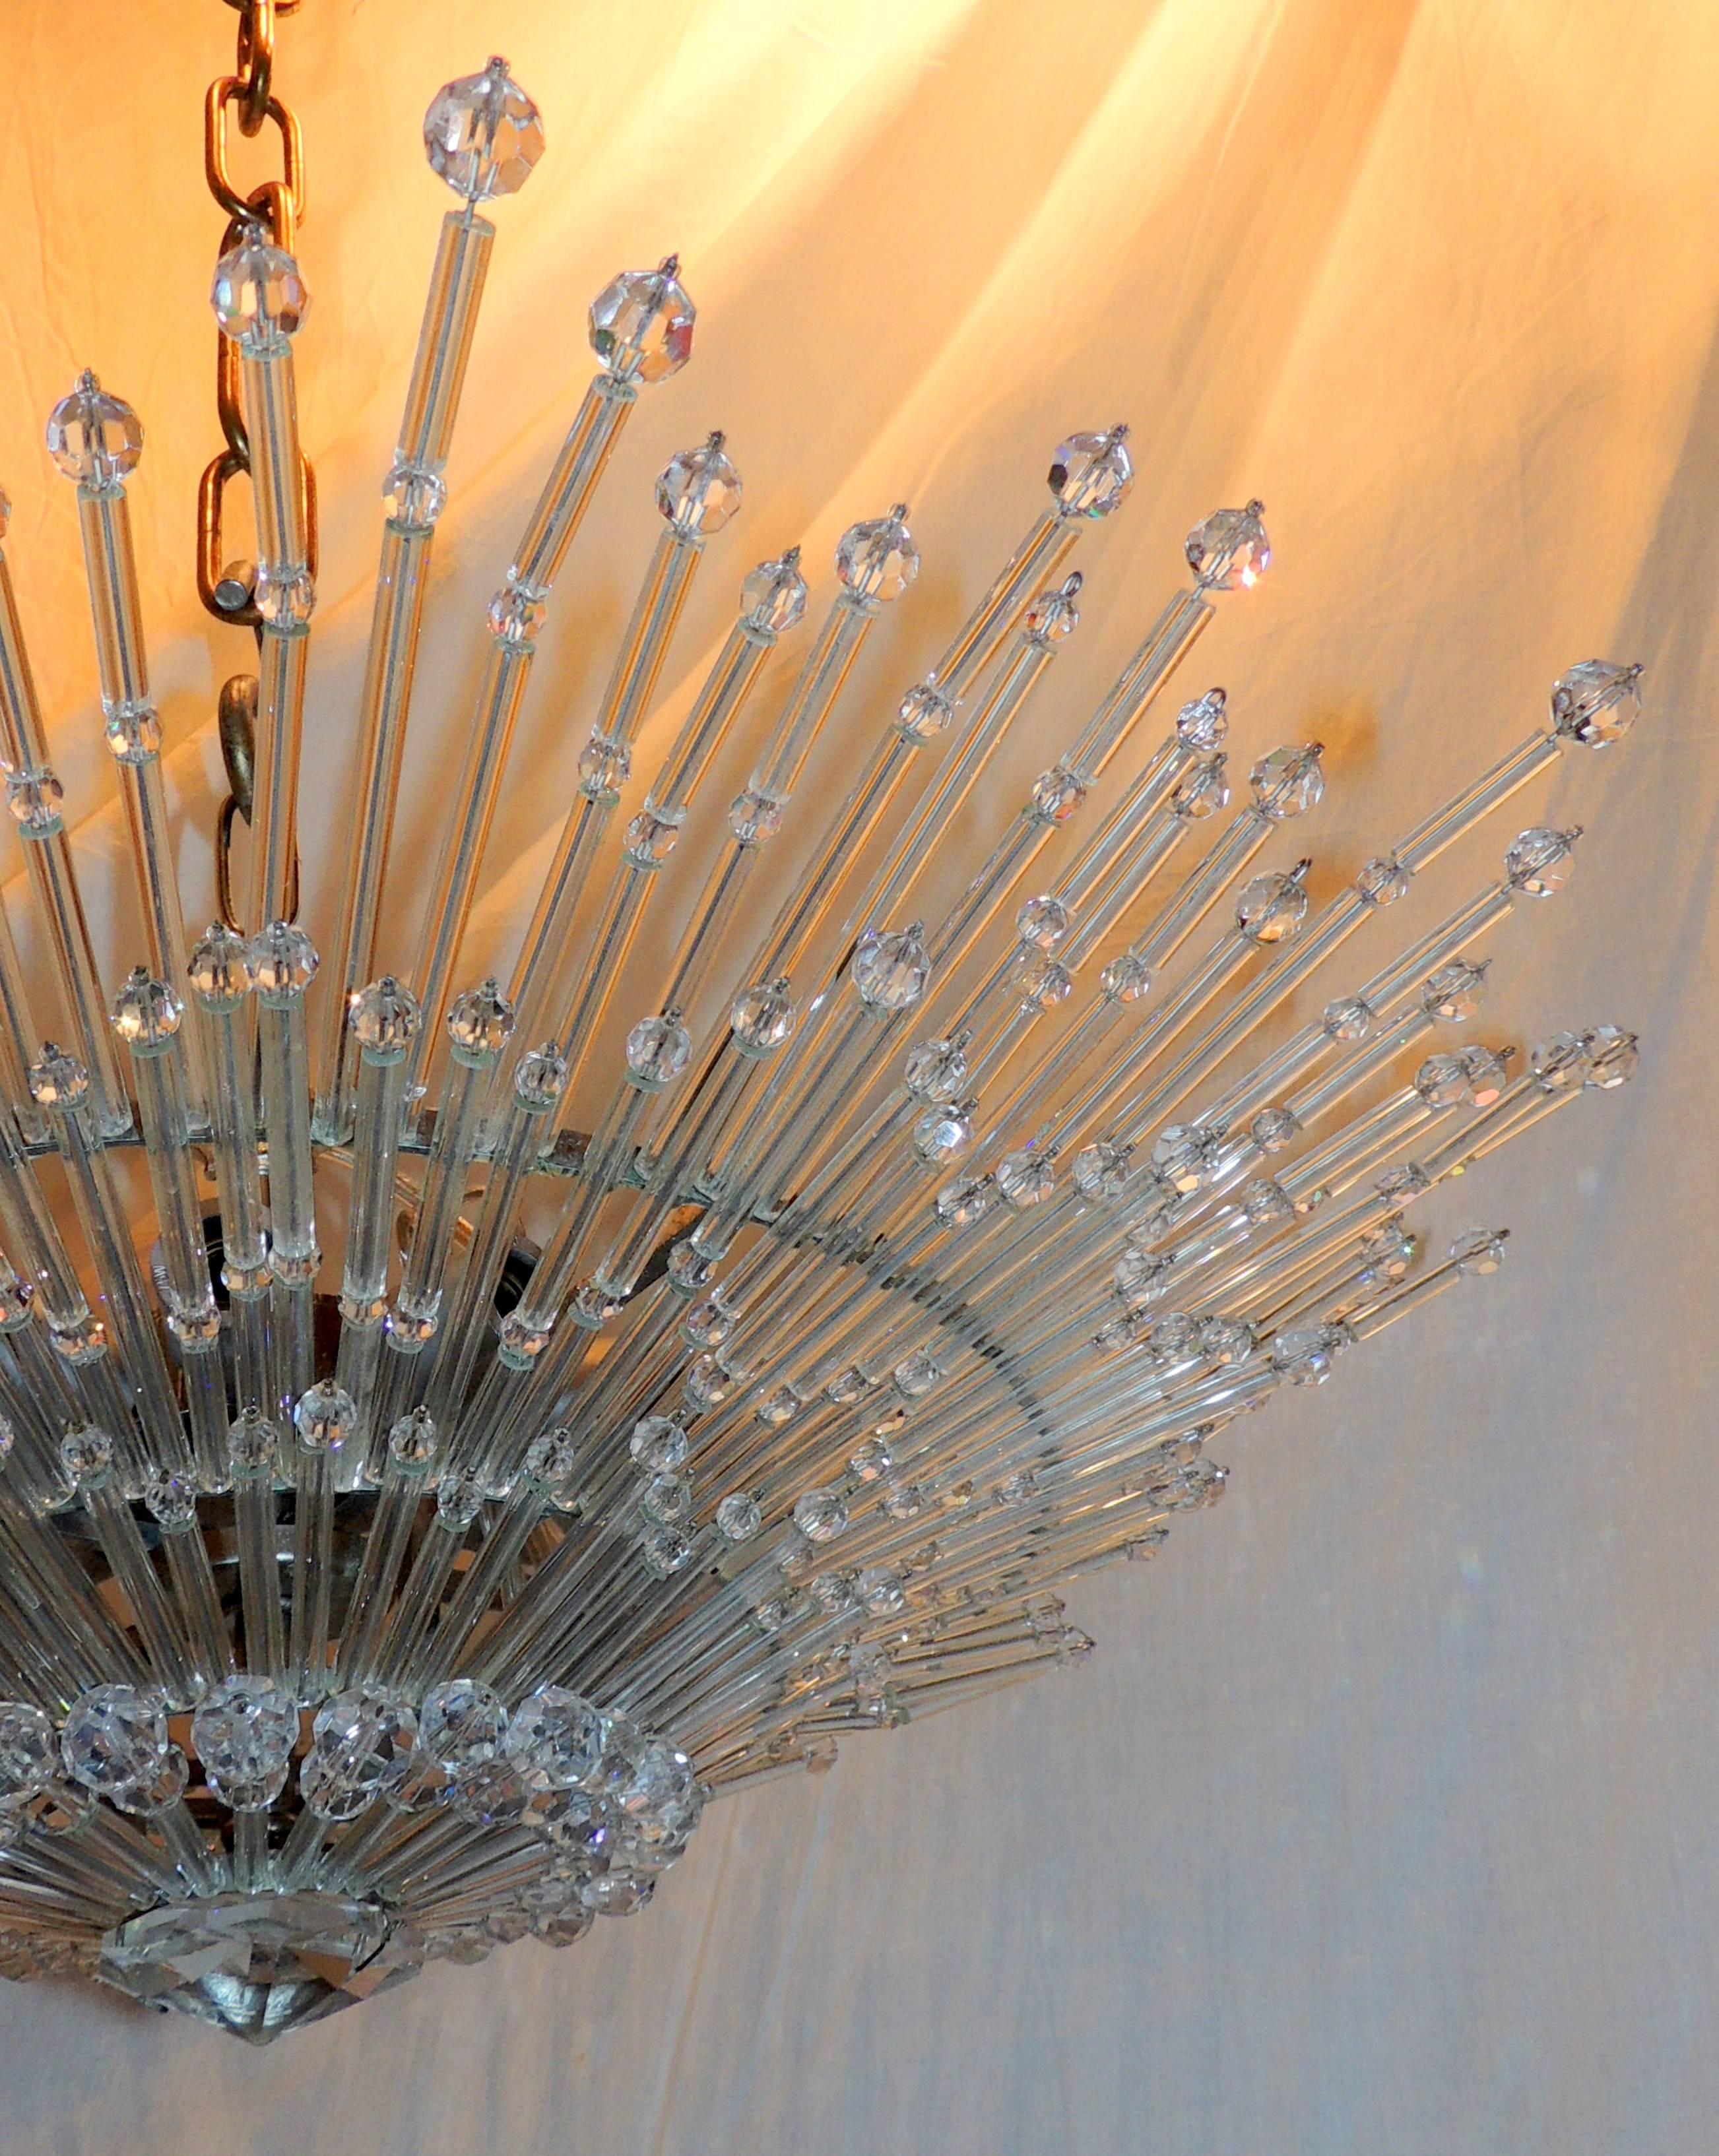 A wonderful sputnik ceiling light fixture chandelier has eight-lights (40 watts per socket) on the inside and is accented with round glass faceted beads and cylinder panels, adding a touch of glamour and whimsy. This chandelier has a polished nickel